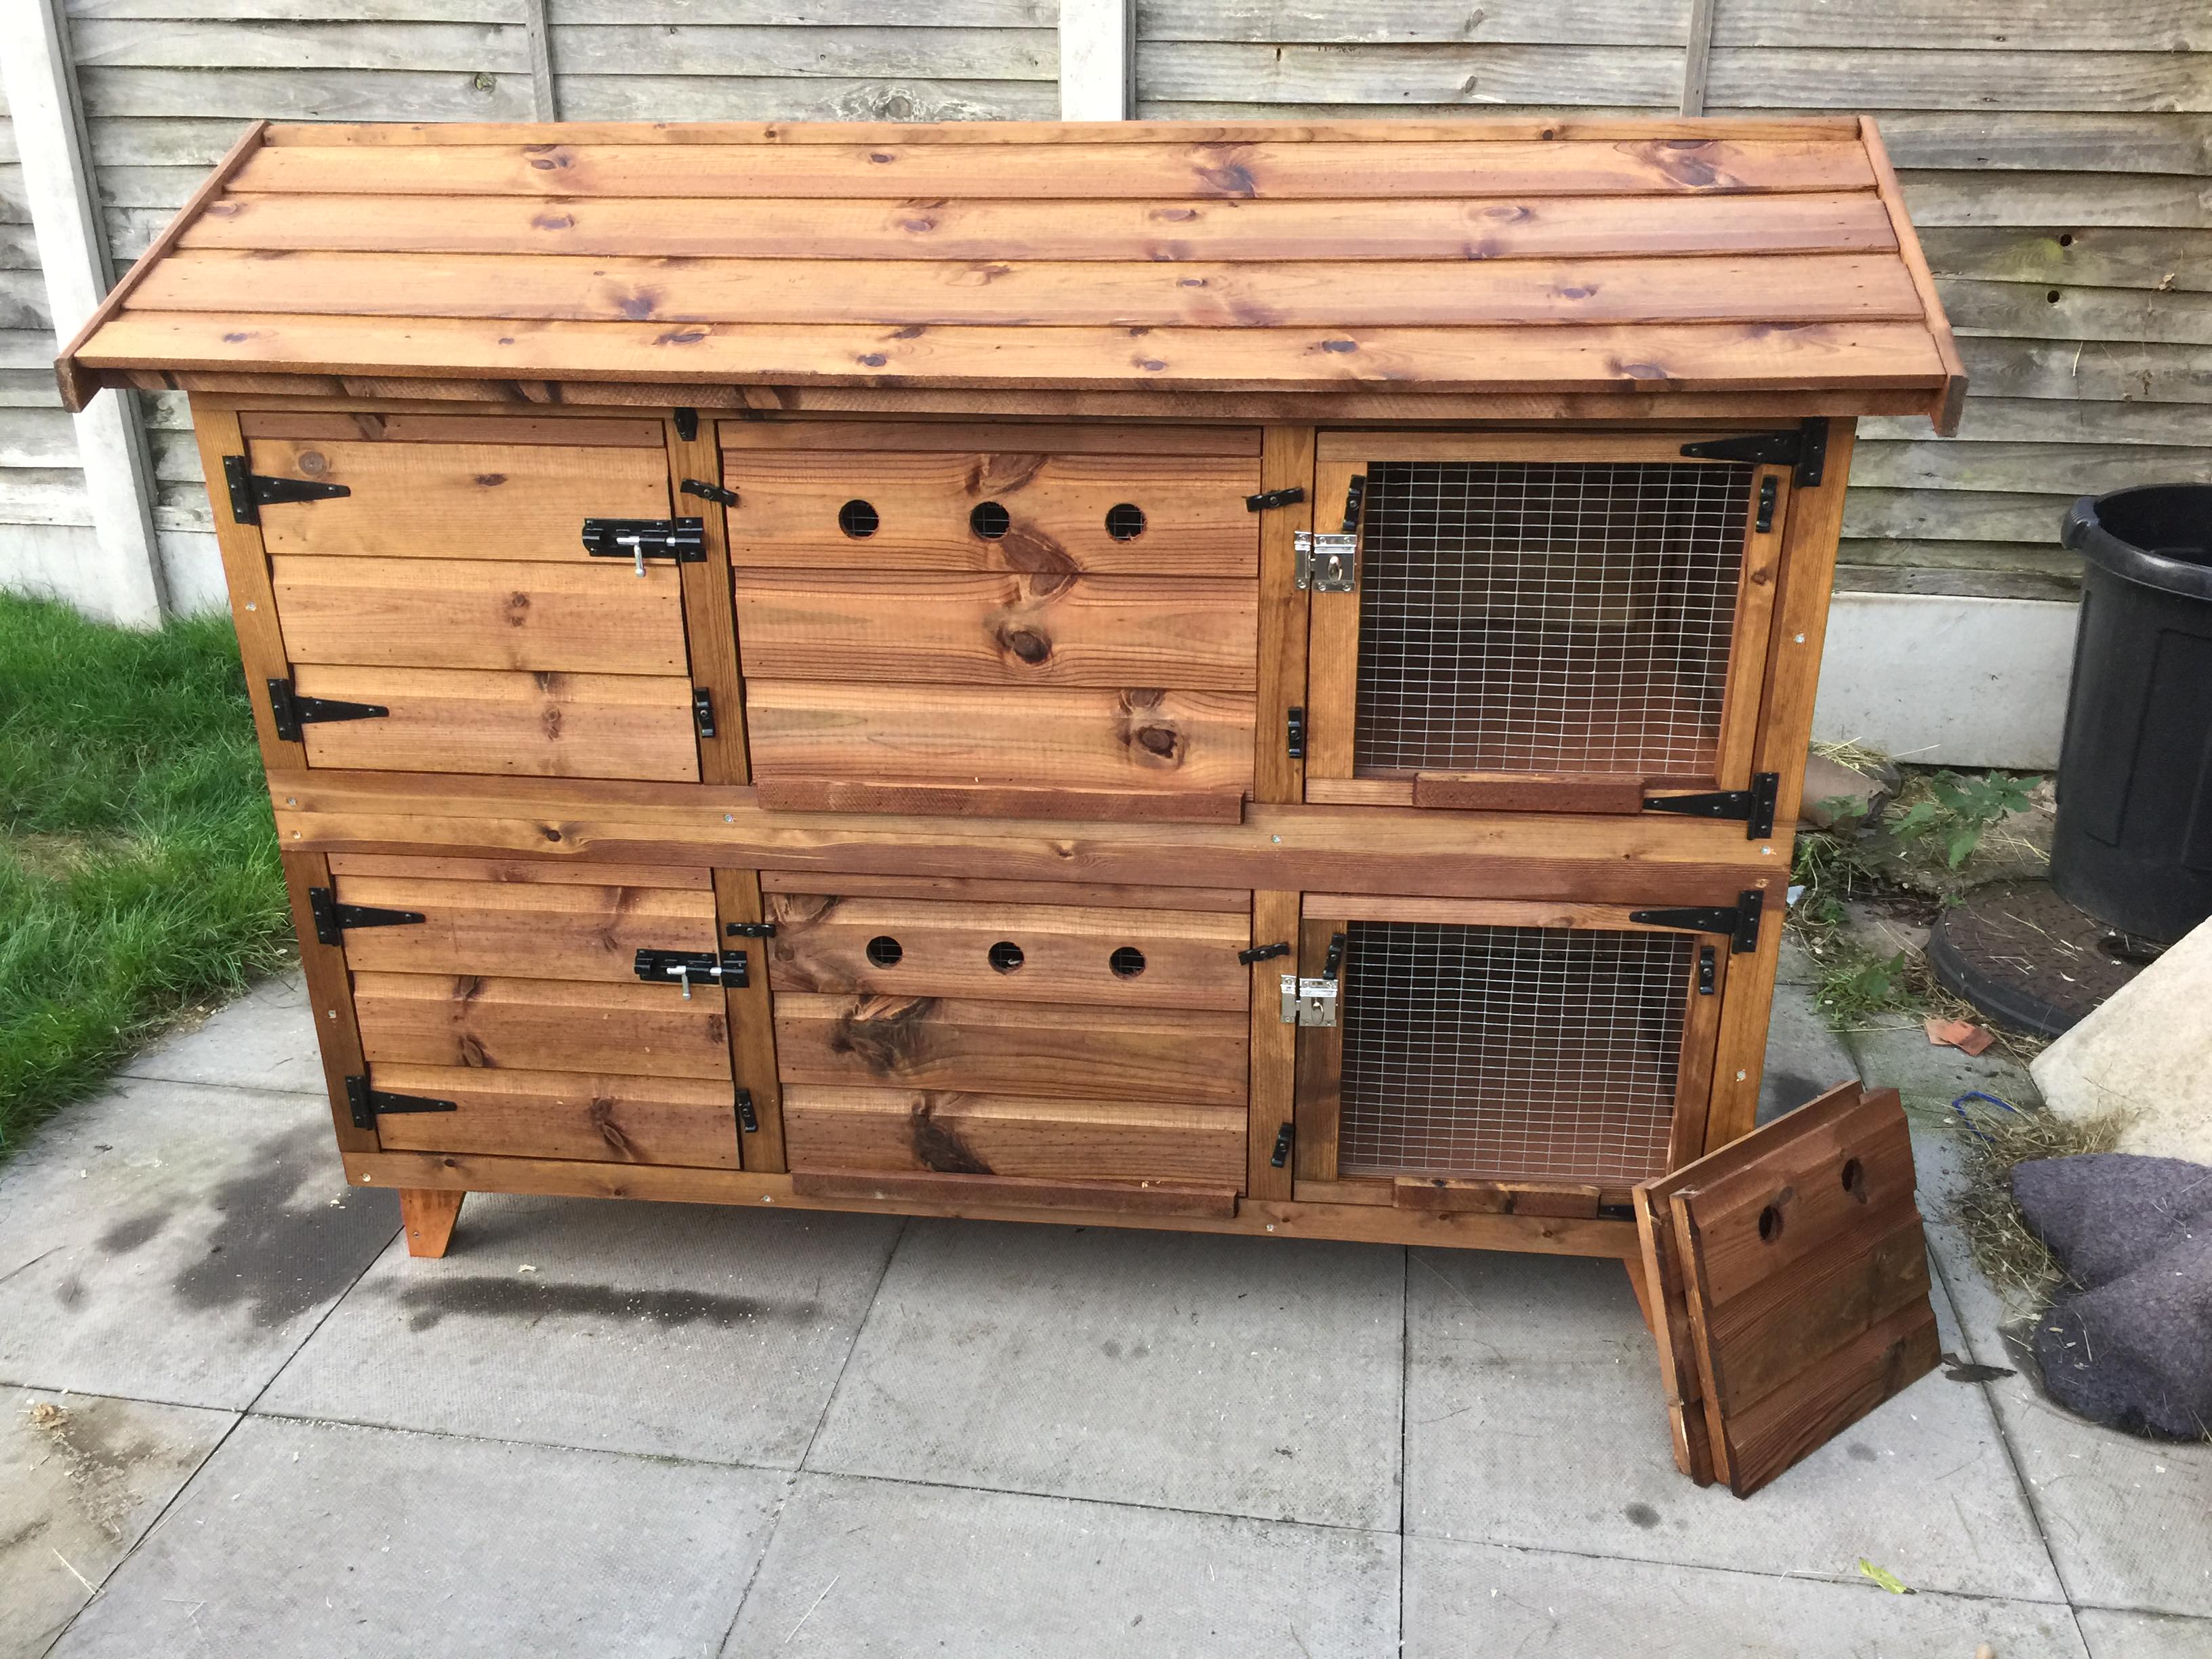 Extra large rabbit hutch Very big Spacious Superior Quality 